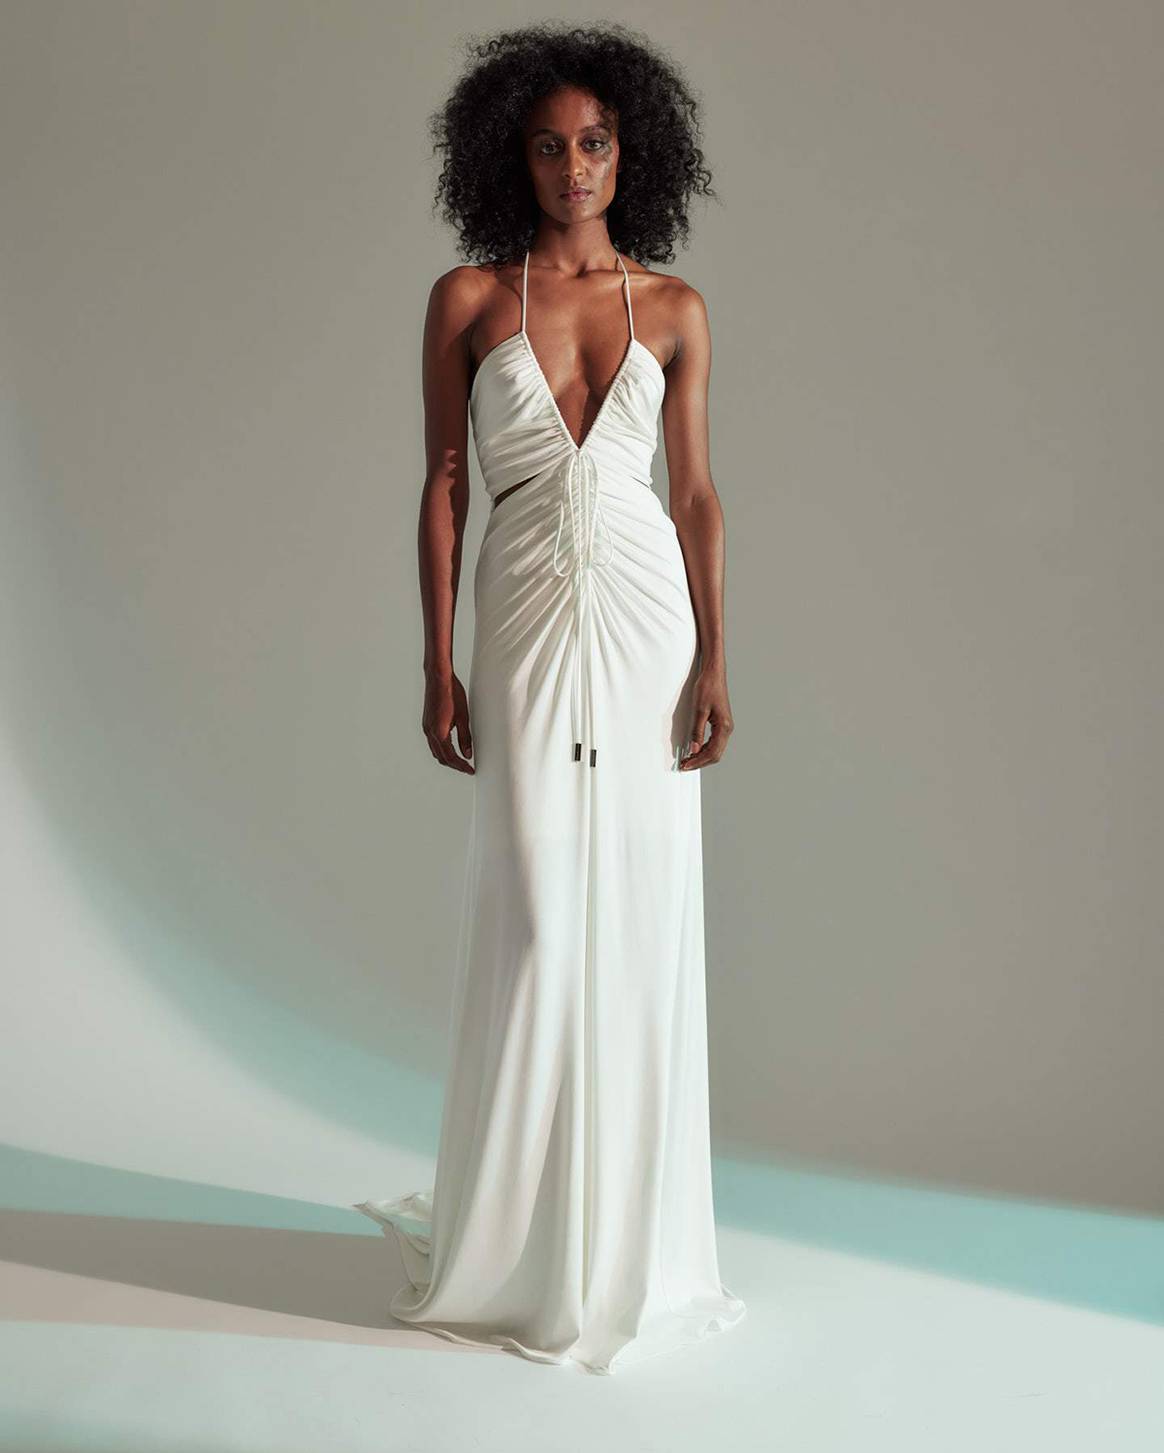 Photo Credits: “Grace” runched jersey gown. Halston x Netflix.